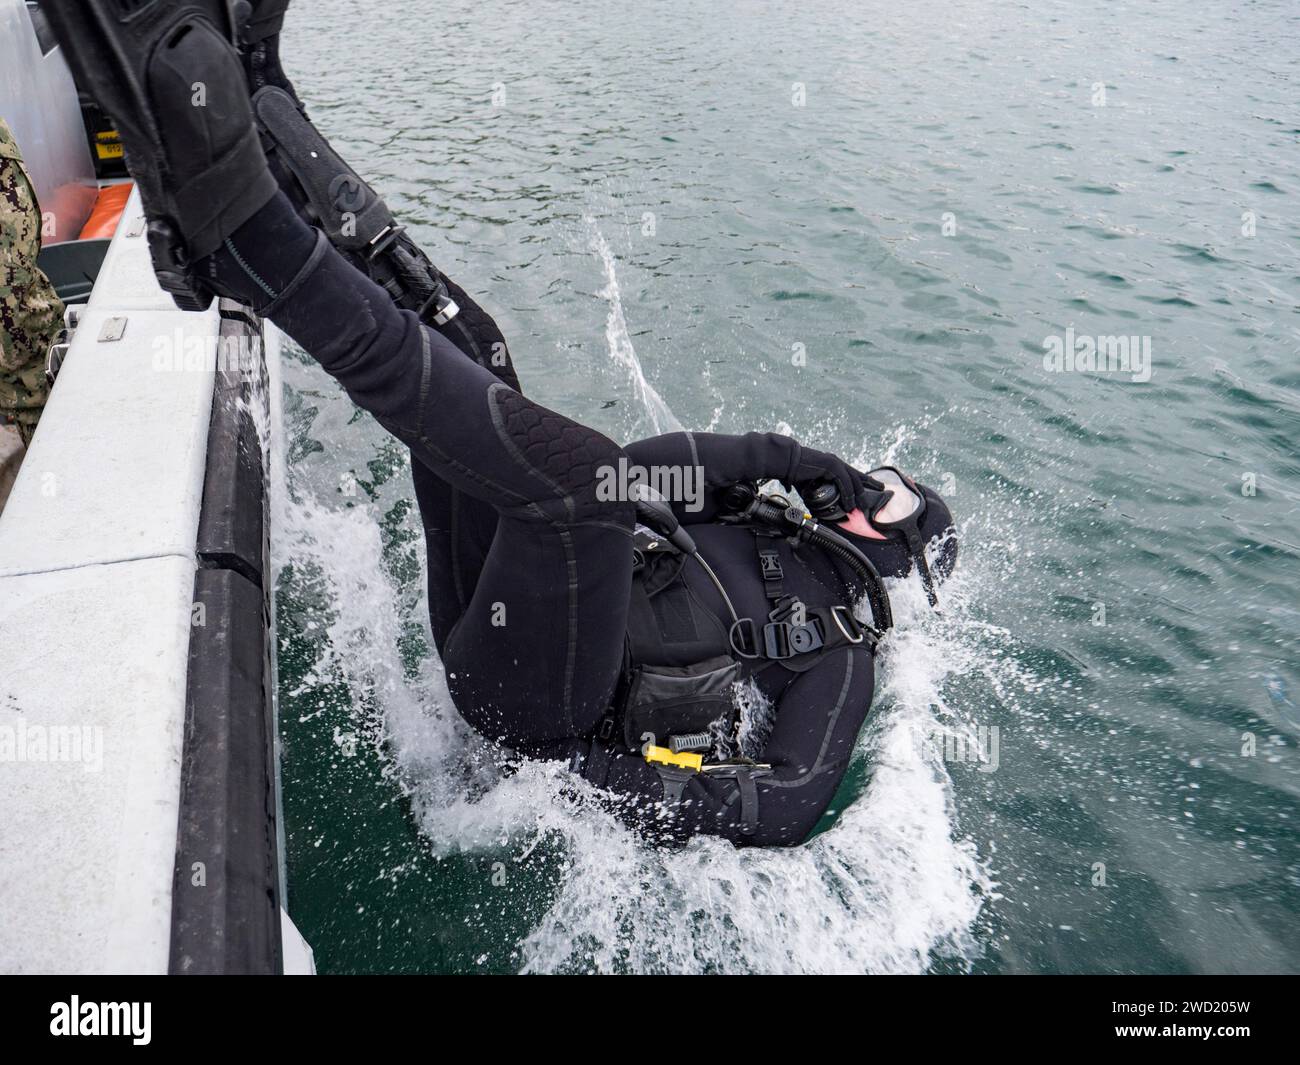 U.S. Navy diver enters the water for a mooring buoy inspection at Commander, Fleet Activities Sasebo, Japan. Stock Photo